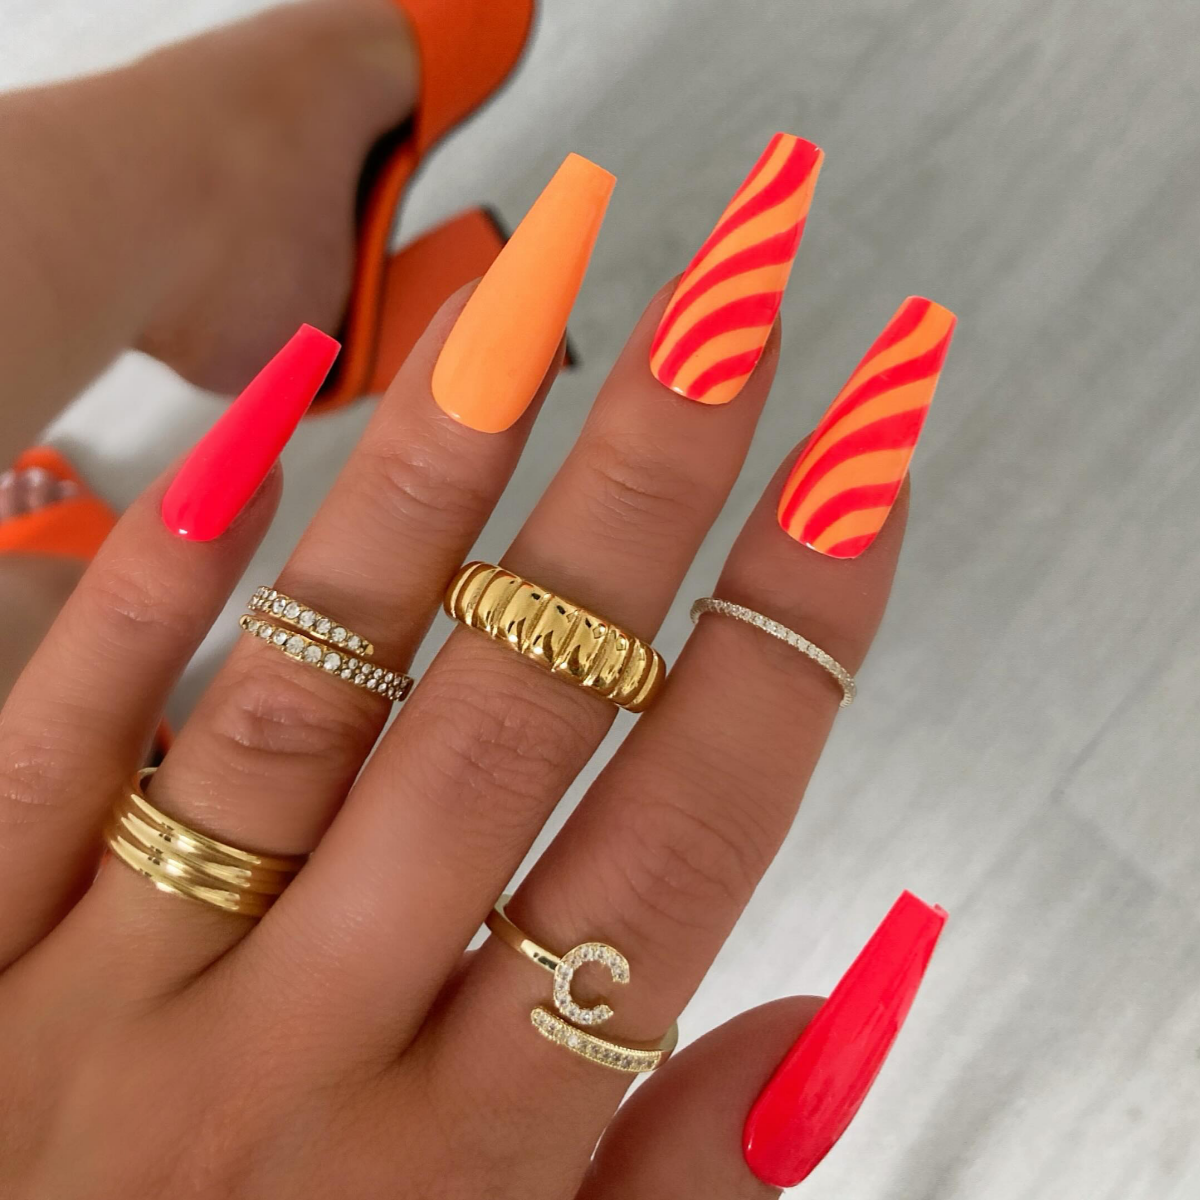 bright orange and red nails